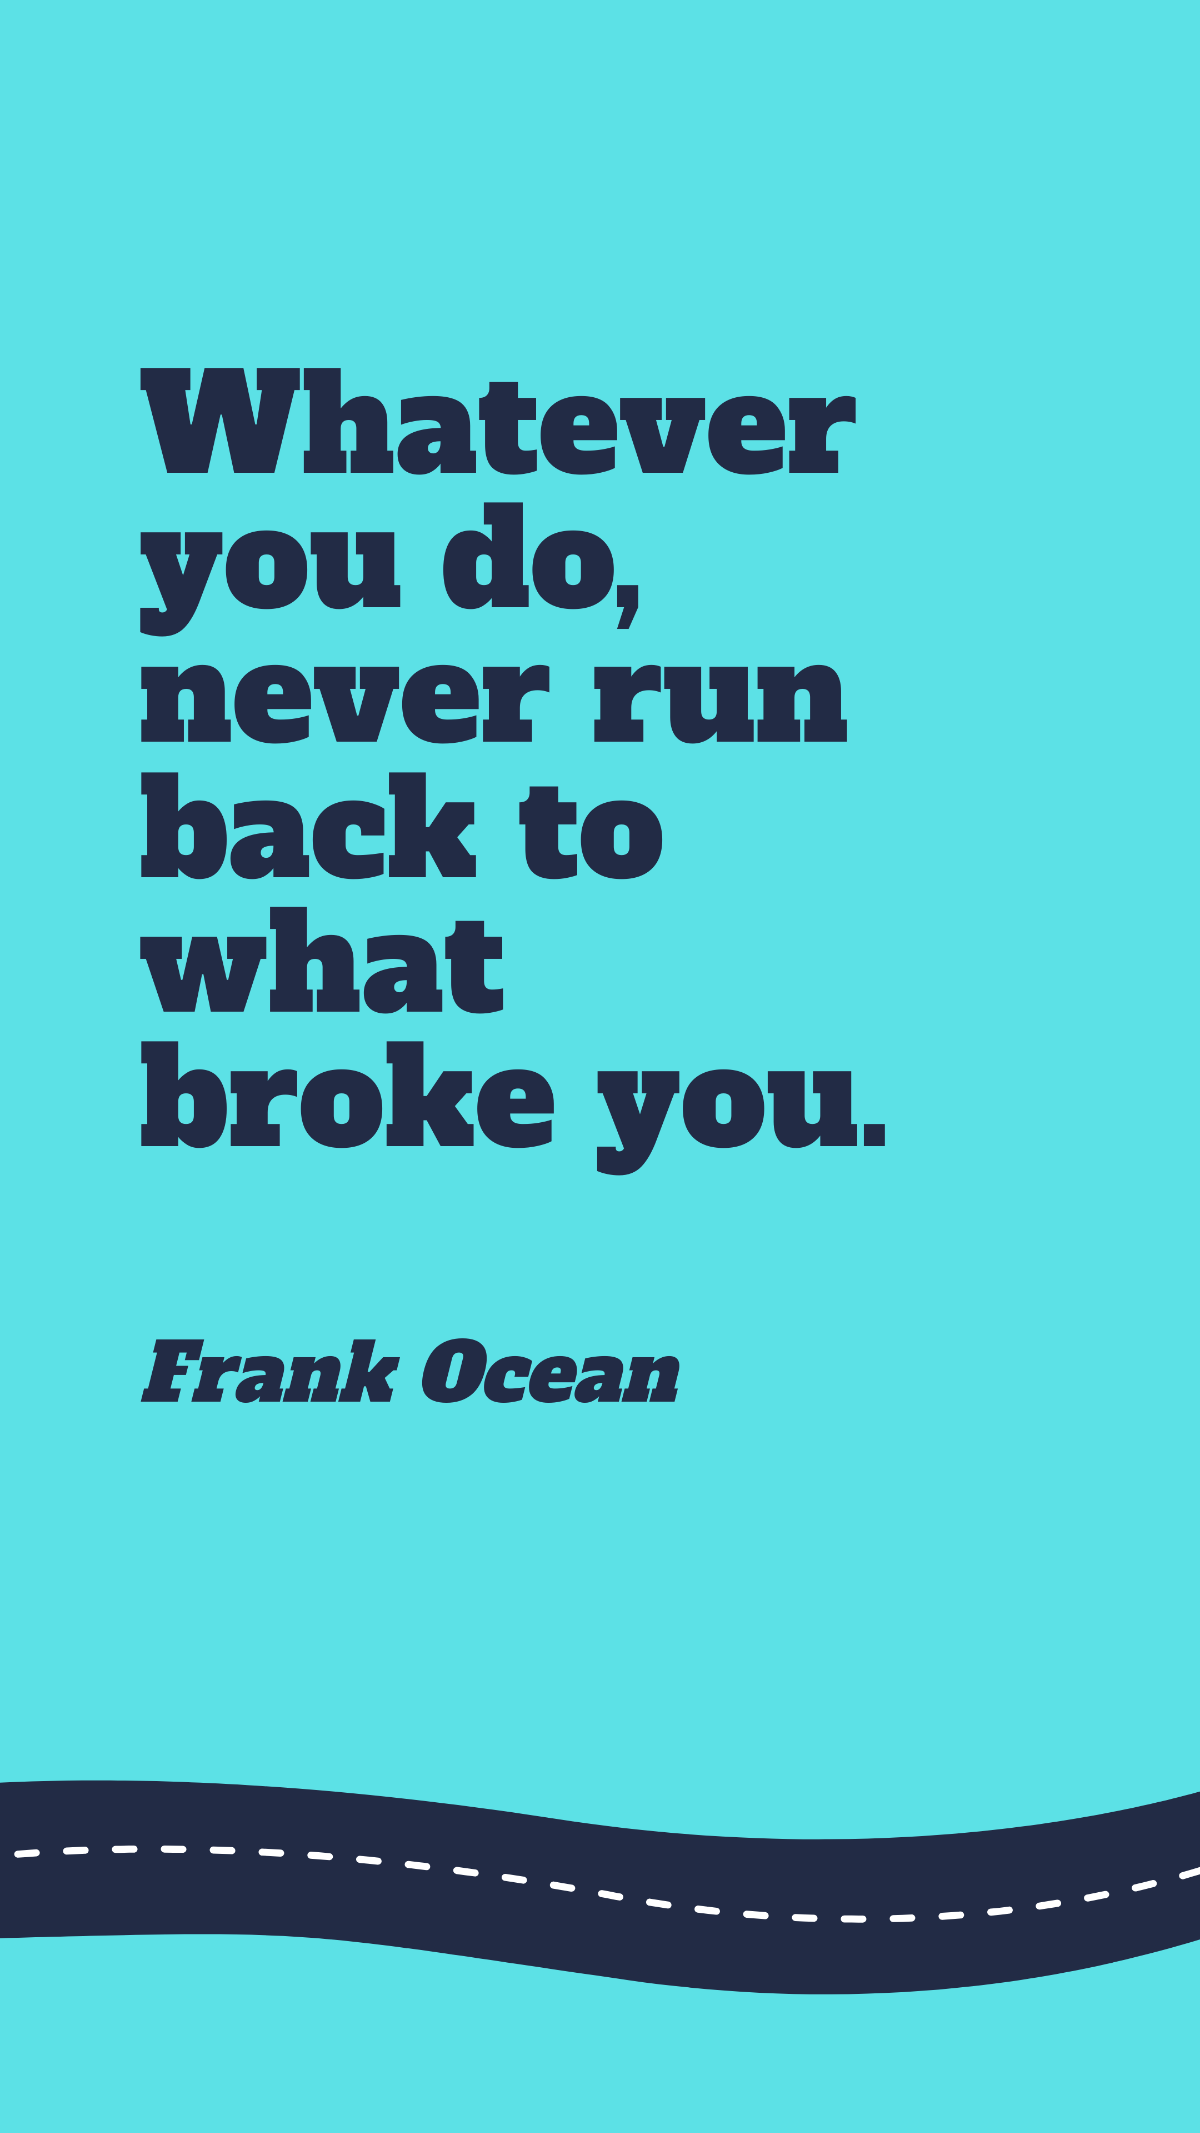 Frank Ocean - Whatever you do, never run back to what broke you.